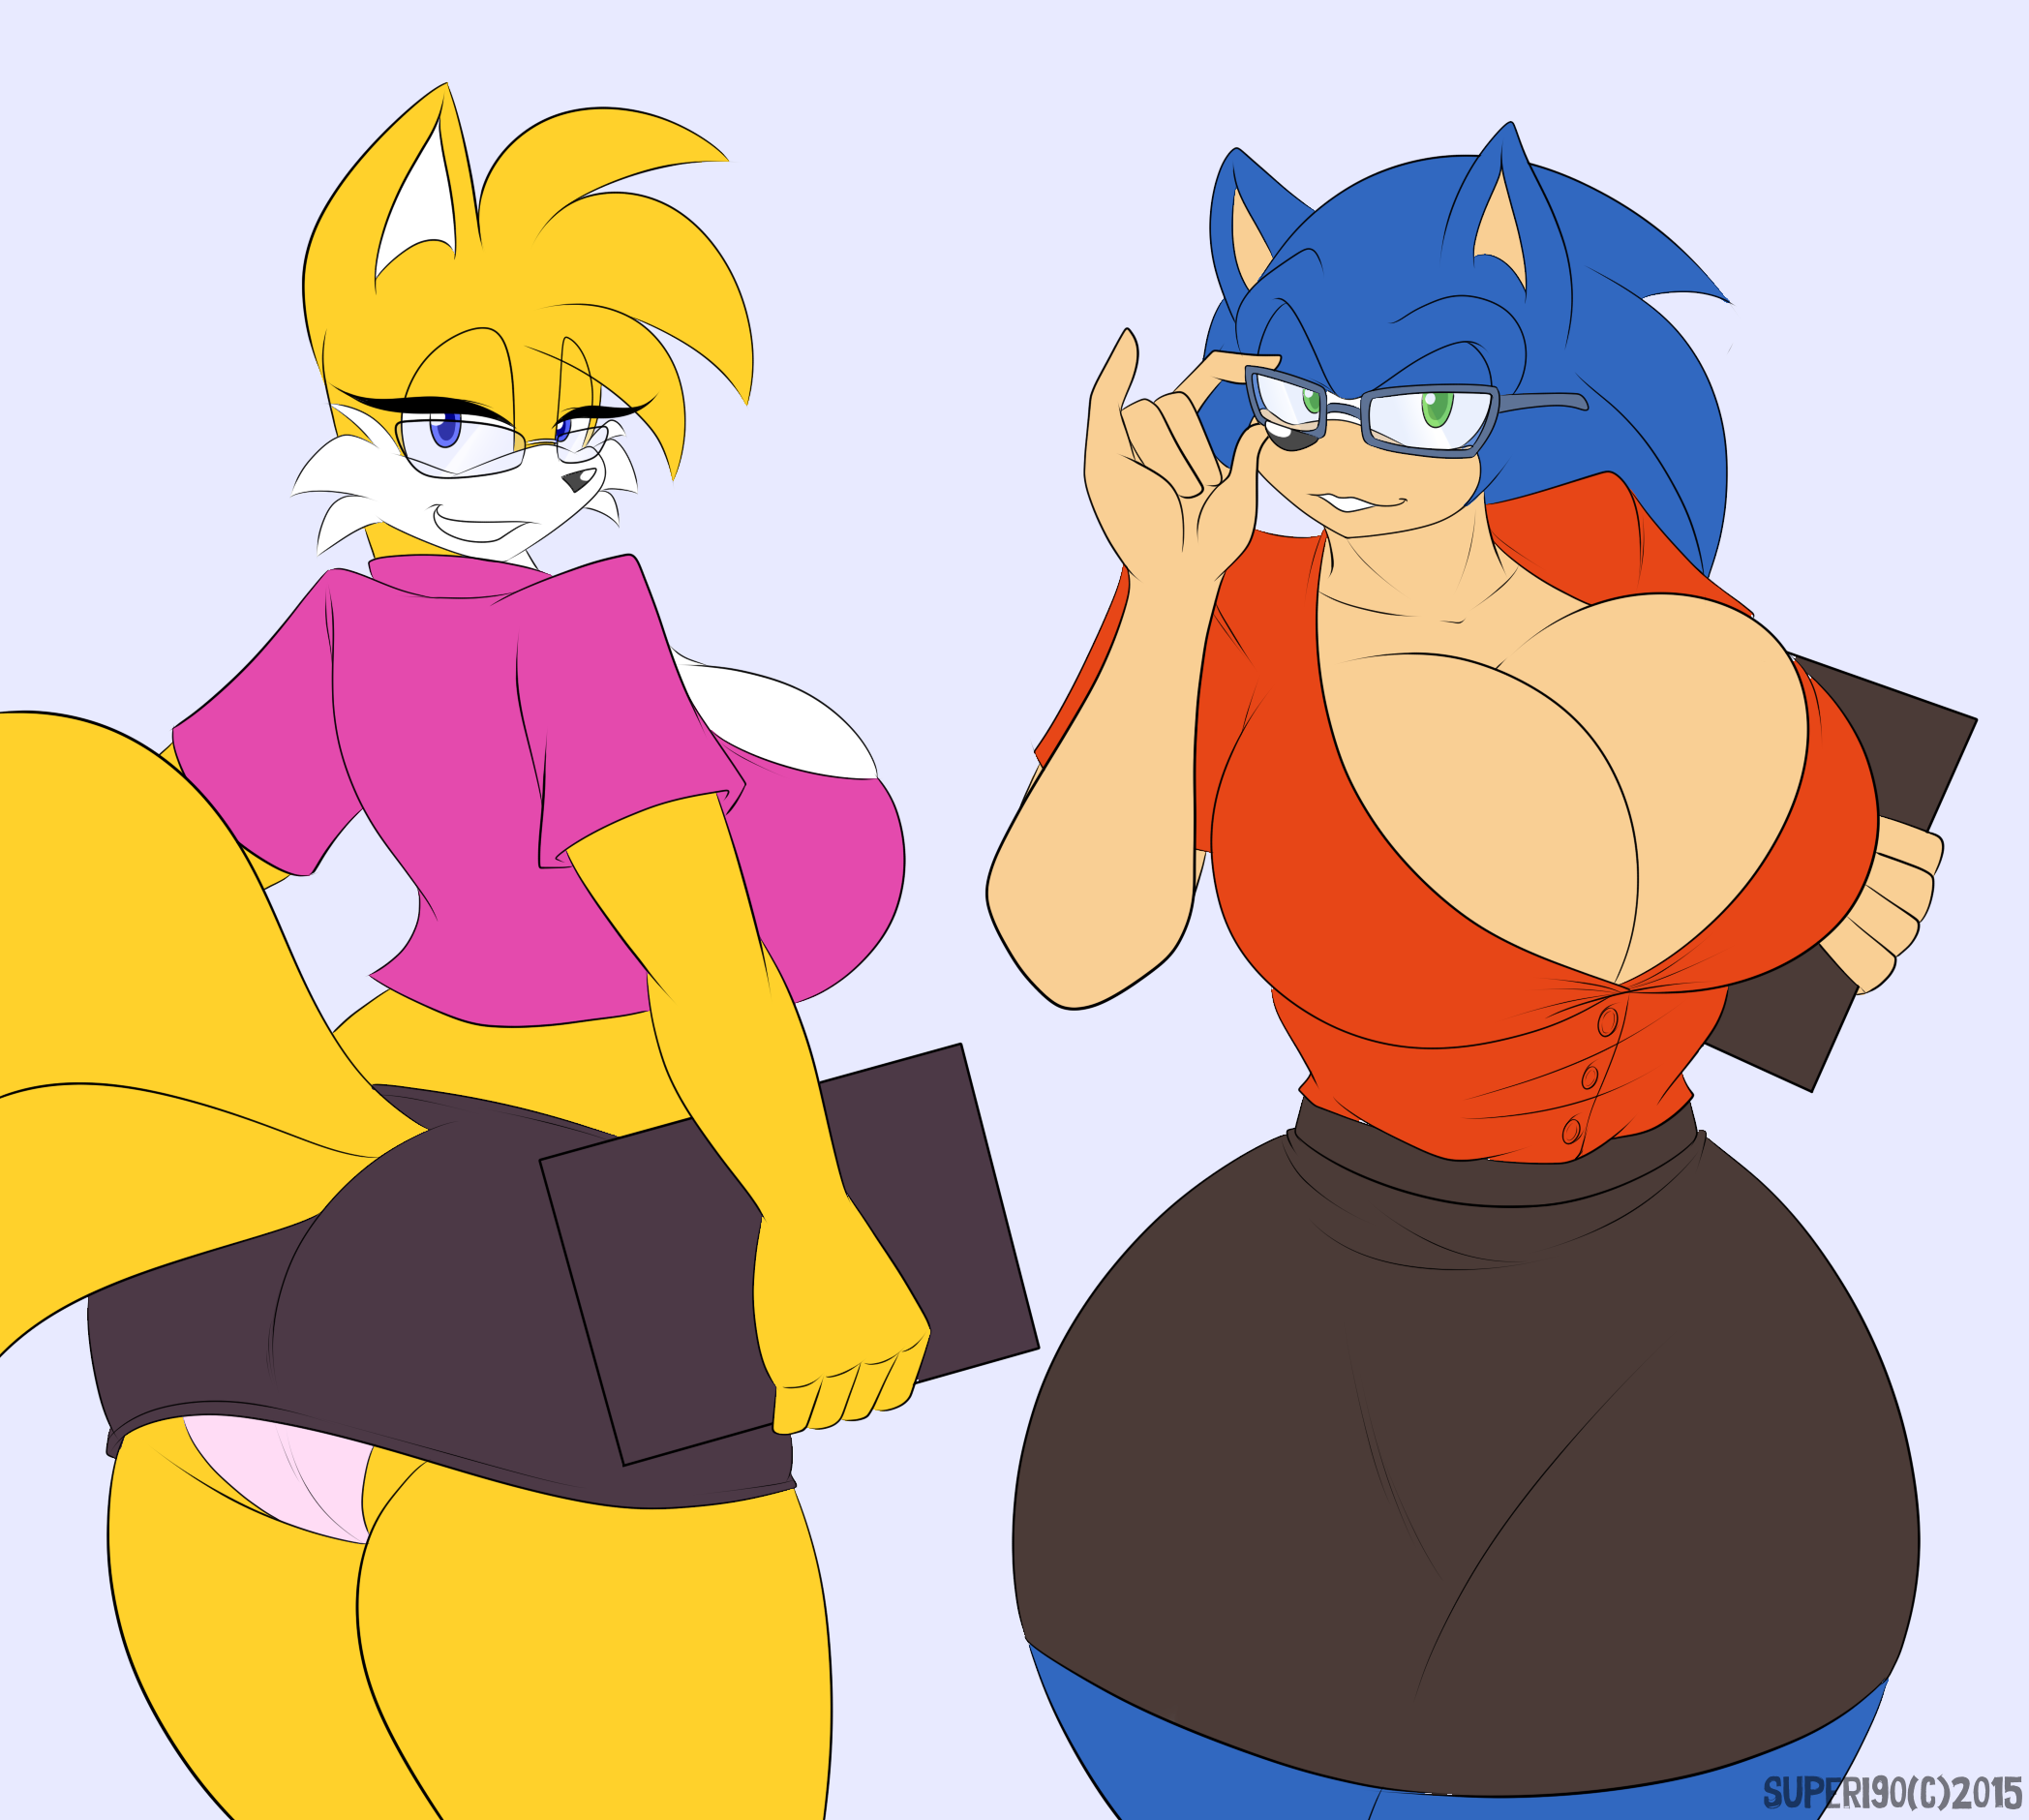 Sexy Secretaries By Superi90 Rule 63 Know Your Meme